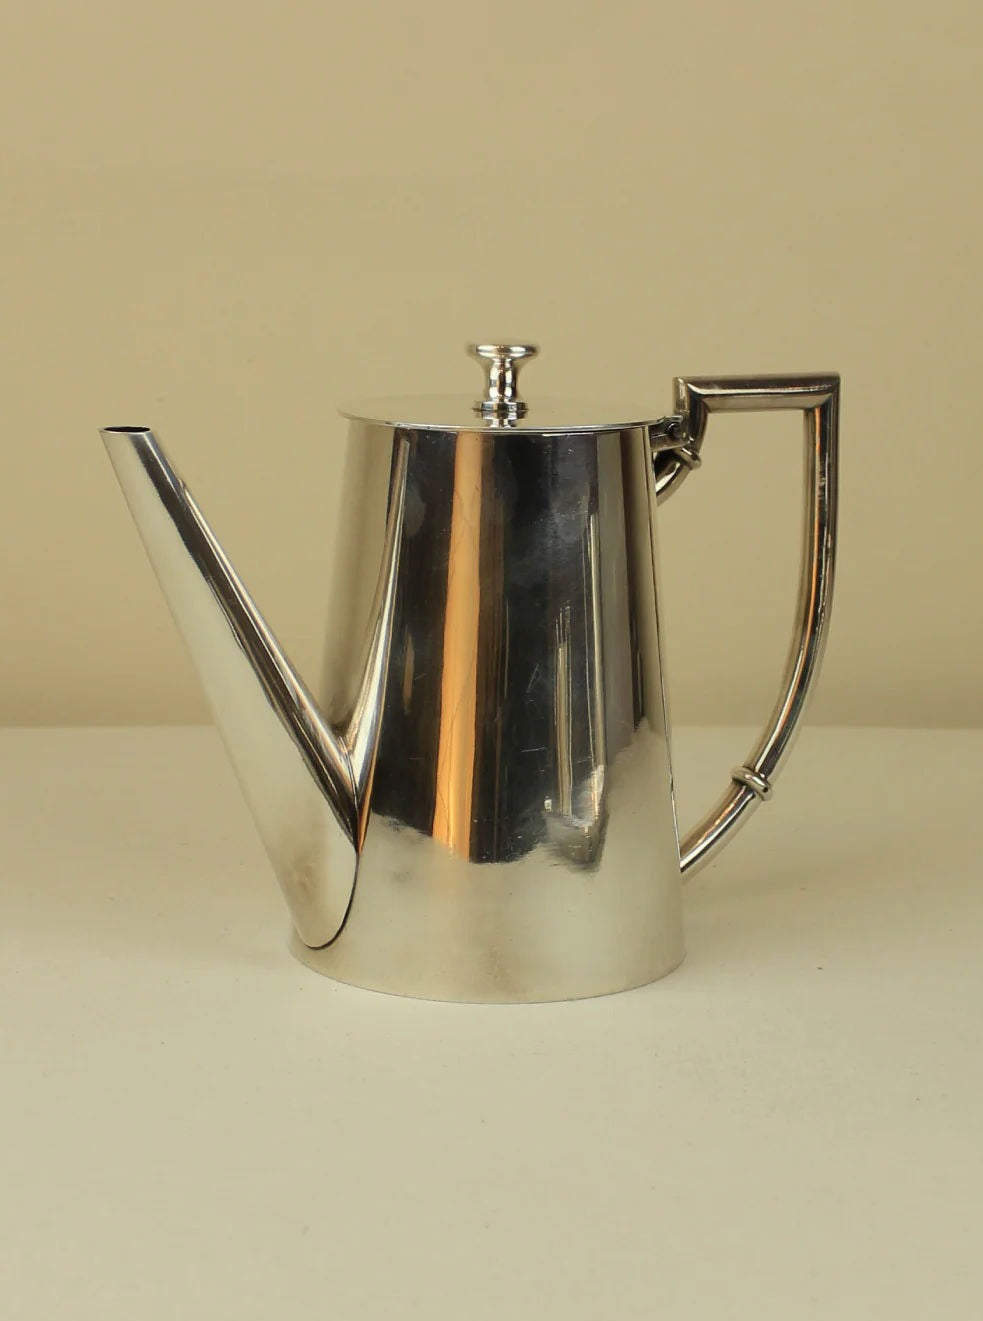 Art Deco Tea/Coffee Service collection with bold, symmetrical shapes and rich colors